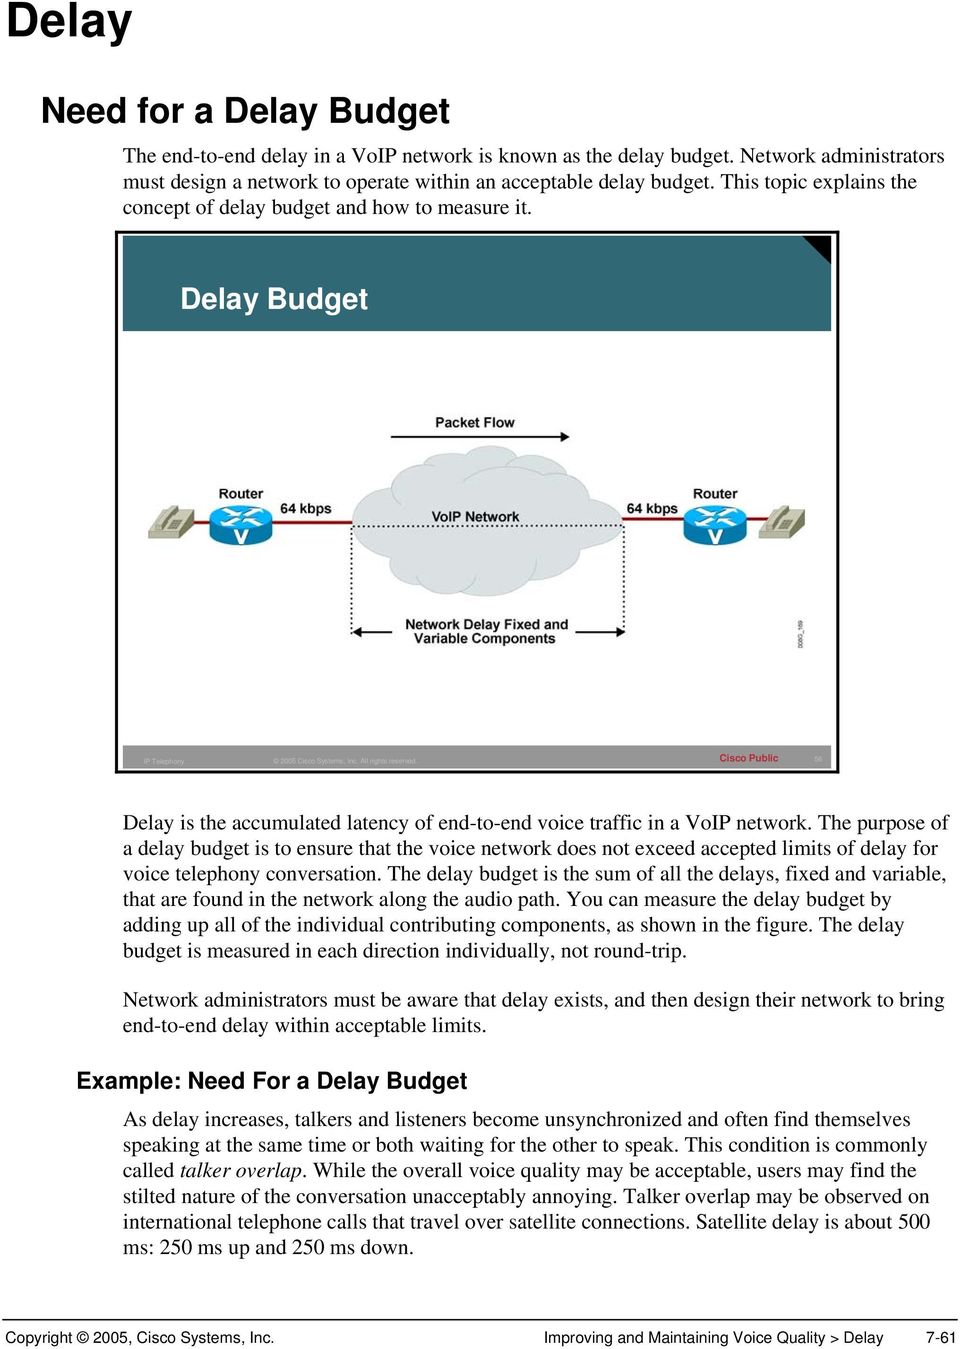 The purpose of a delay budget is to ensure that the voice network does not exceed accepted limits of delay for voice telephony conversation.